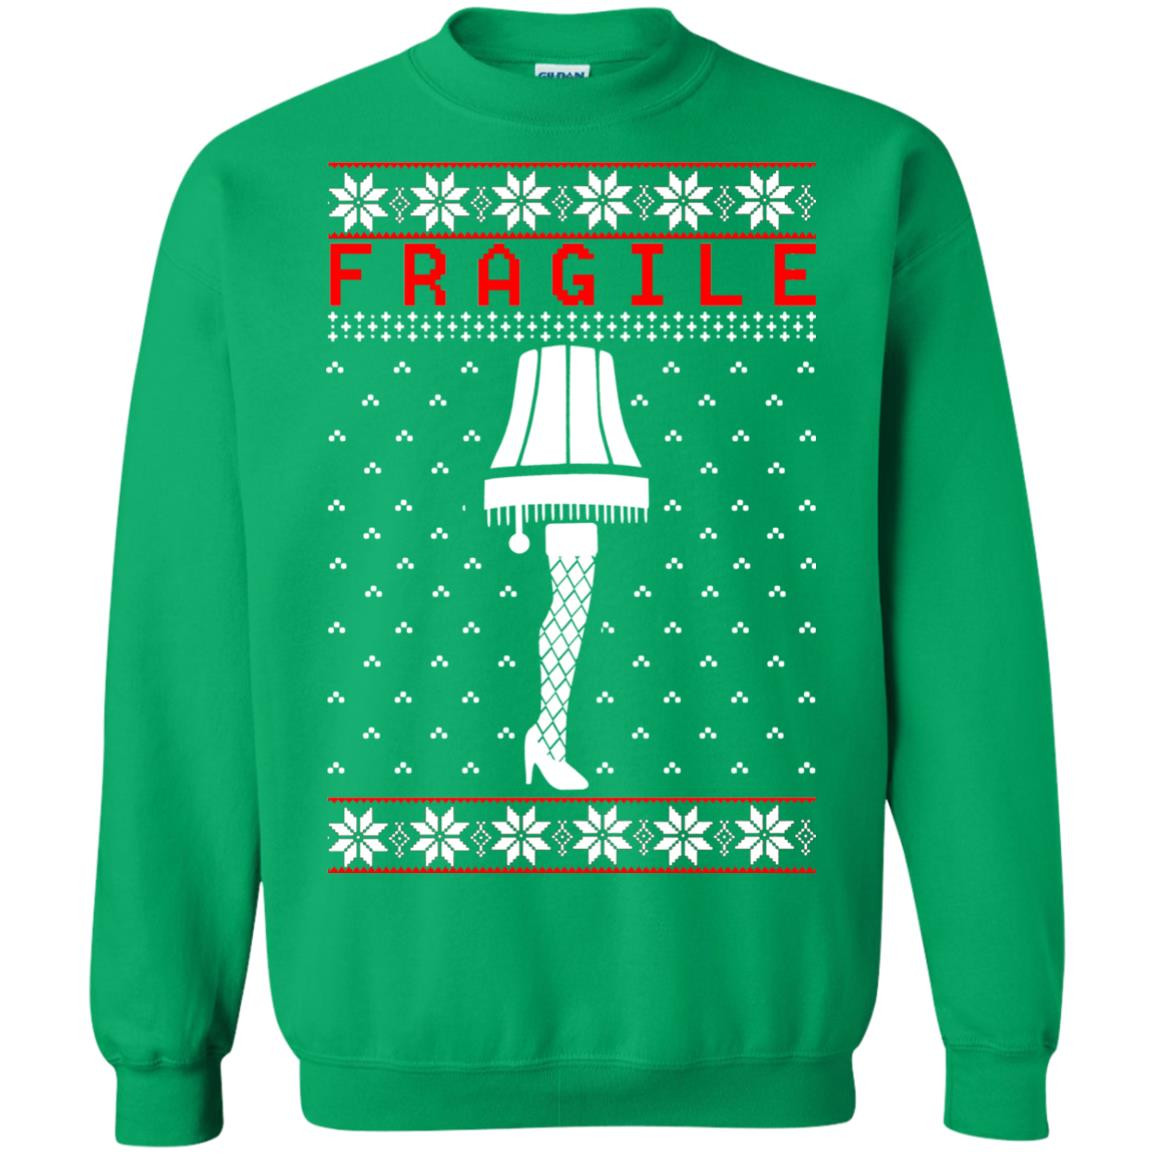 Fragile Lamp From Christmas Story
 Christmas Story Fragile The Leg Lamp Ugly Sweater Long